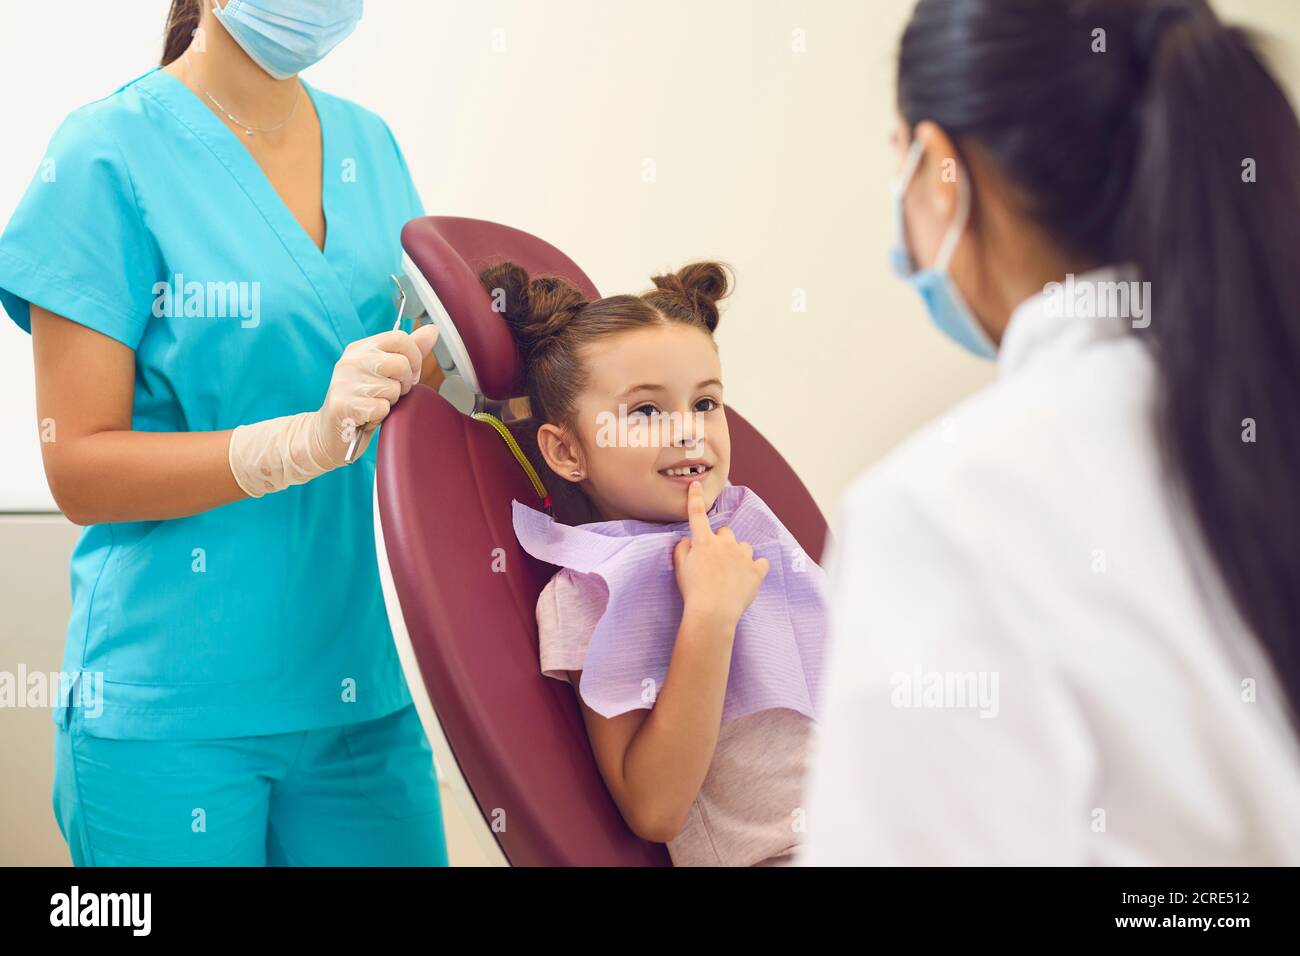 Smiling girl sitting in dental chair and showing front teeth to dentist Stock Photo